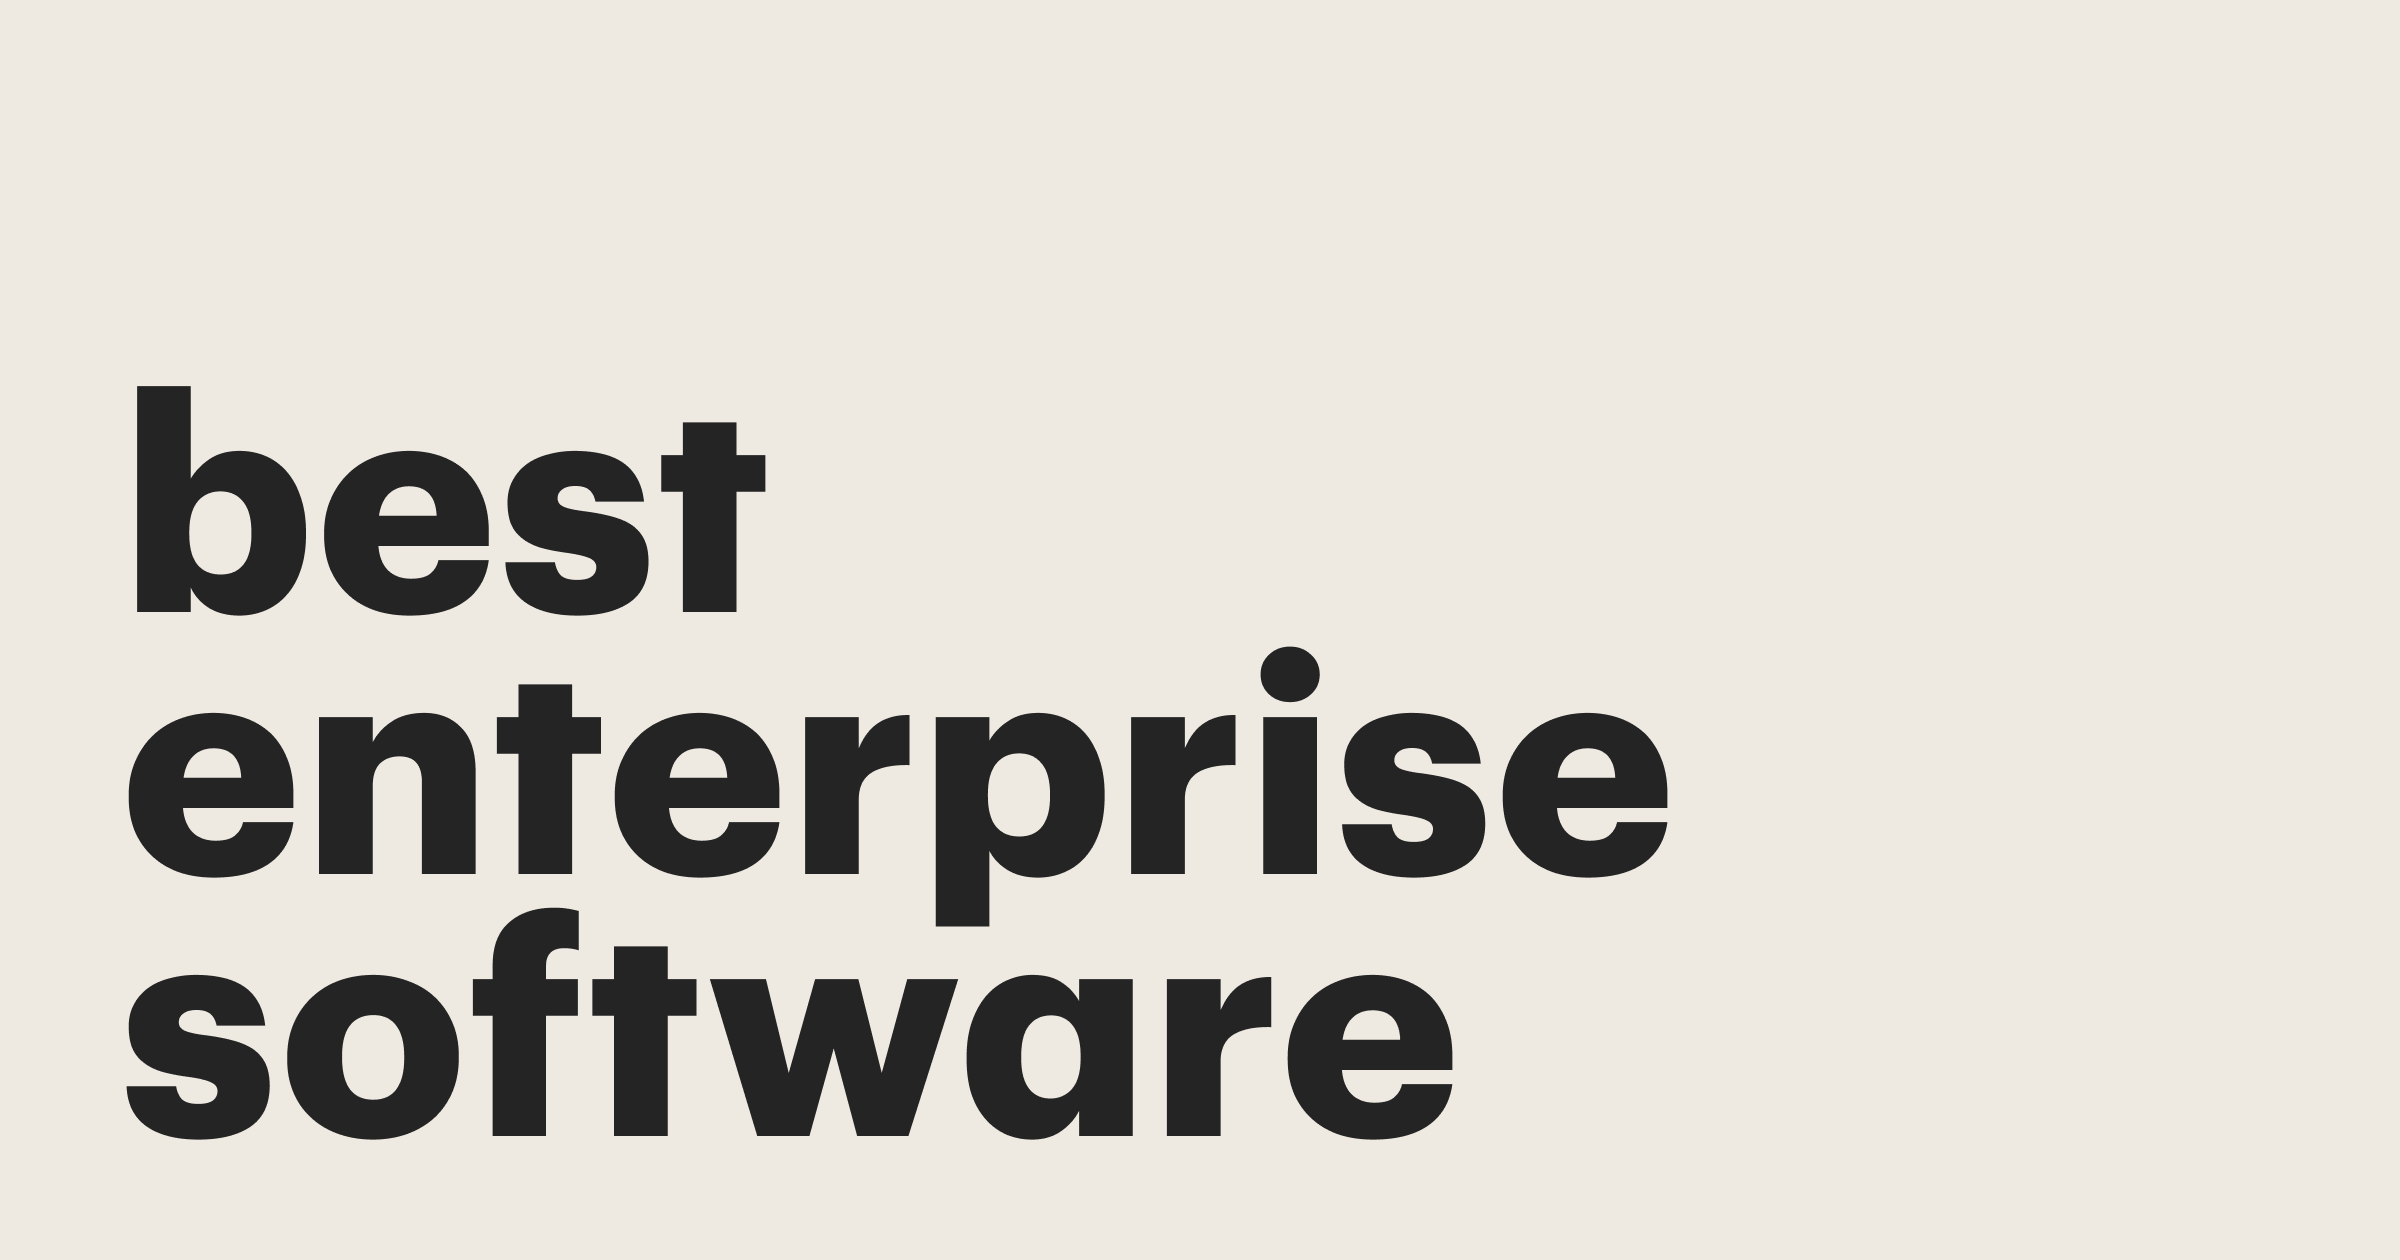 Top 11 best enterprise software companies to adopt in 2023